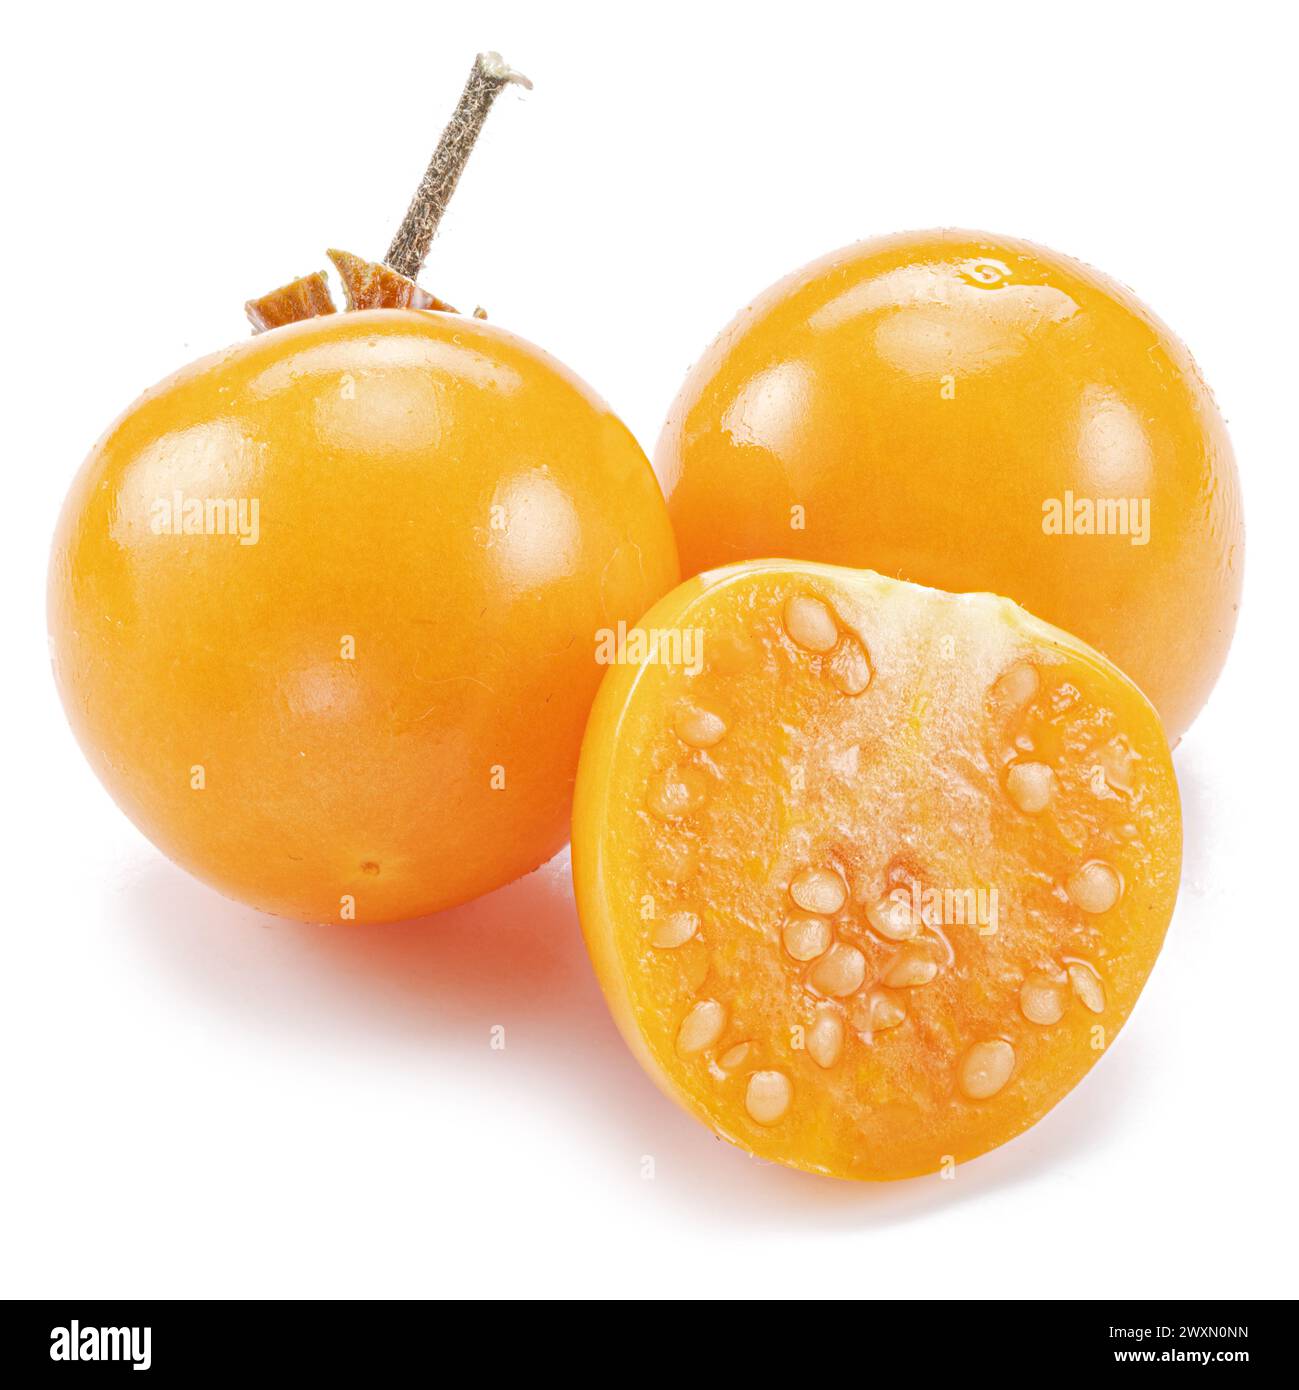 Ripe physalis or golden berry fruits isolated on white background. Stock Photo